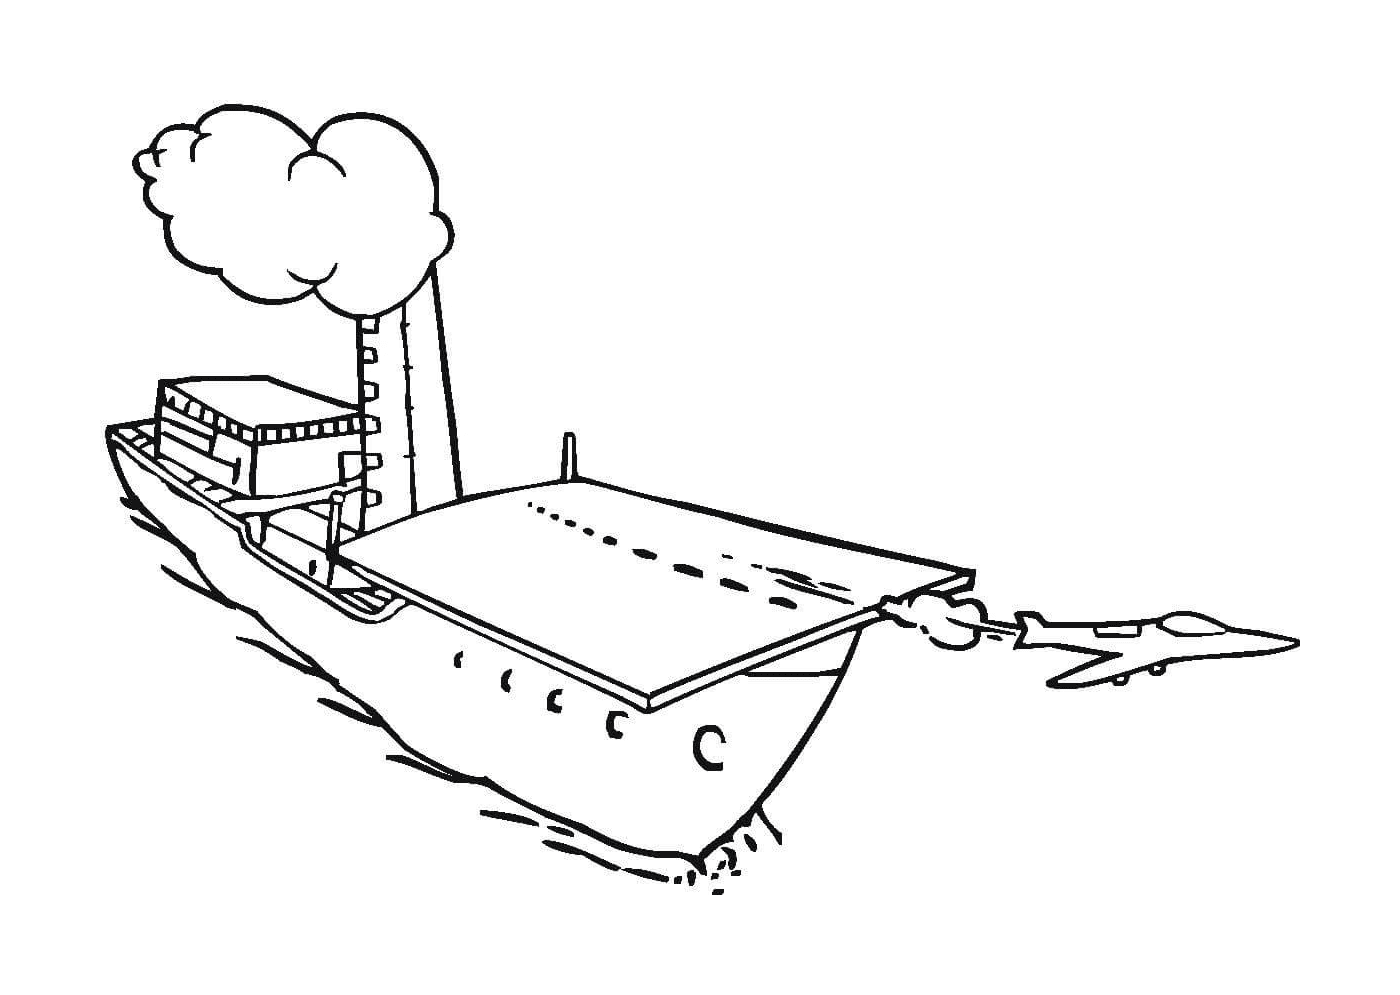  A boat on the water 